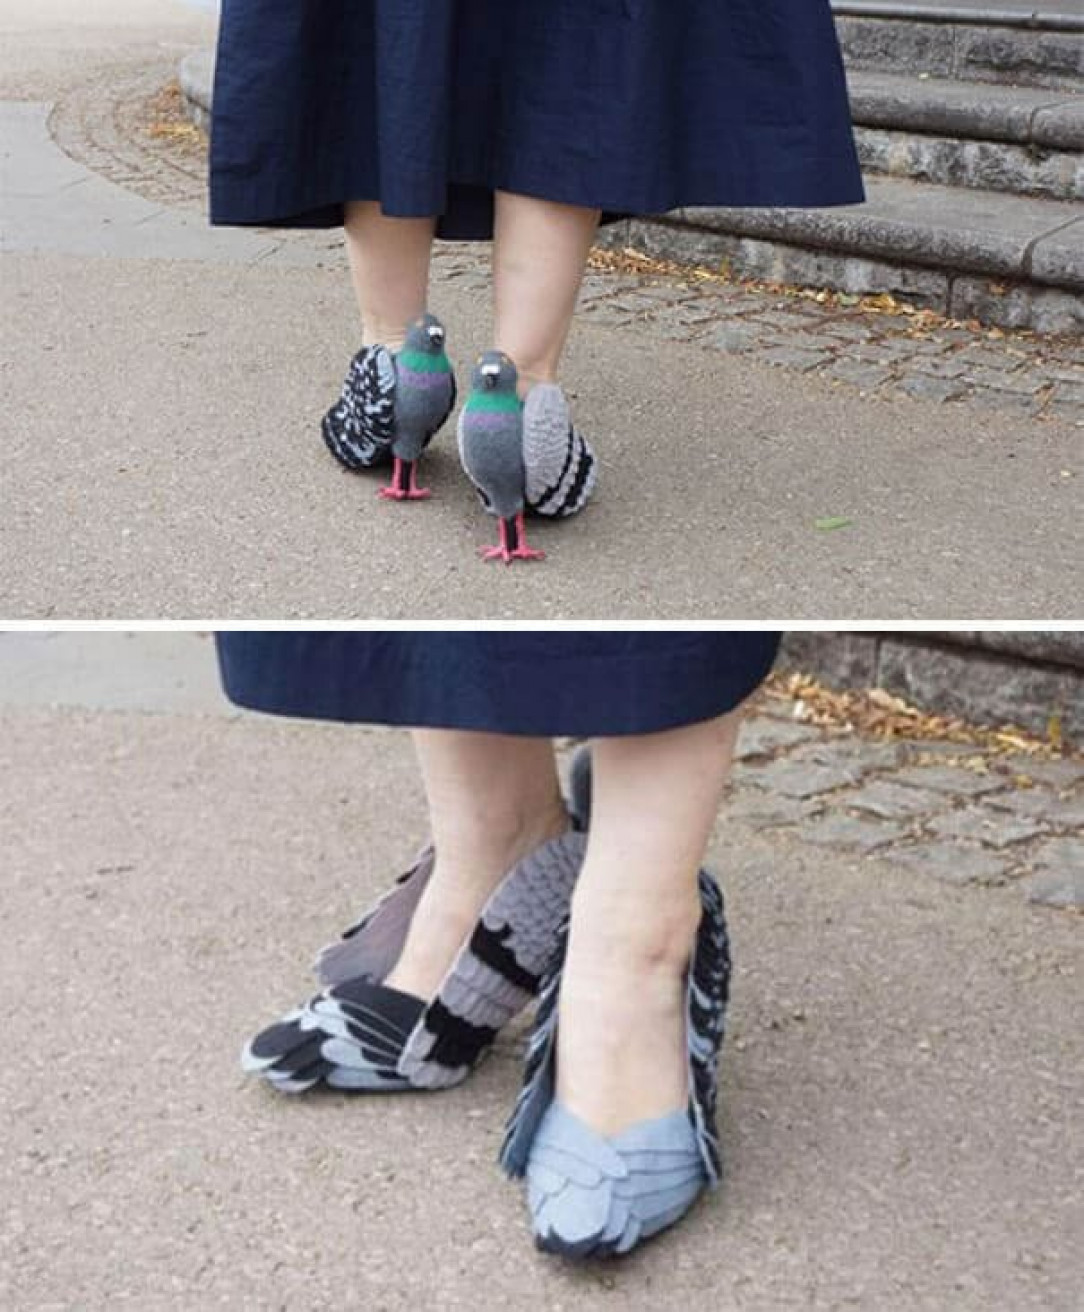 Oh dear! Pigeon shoes